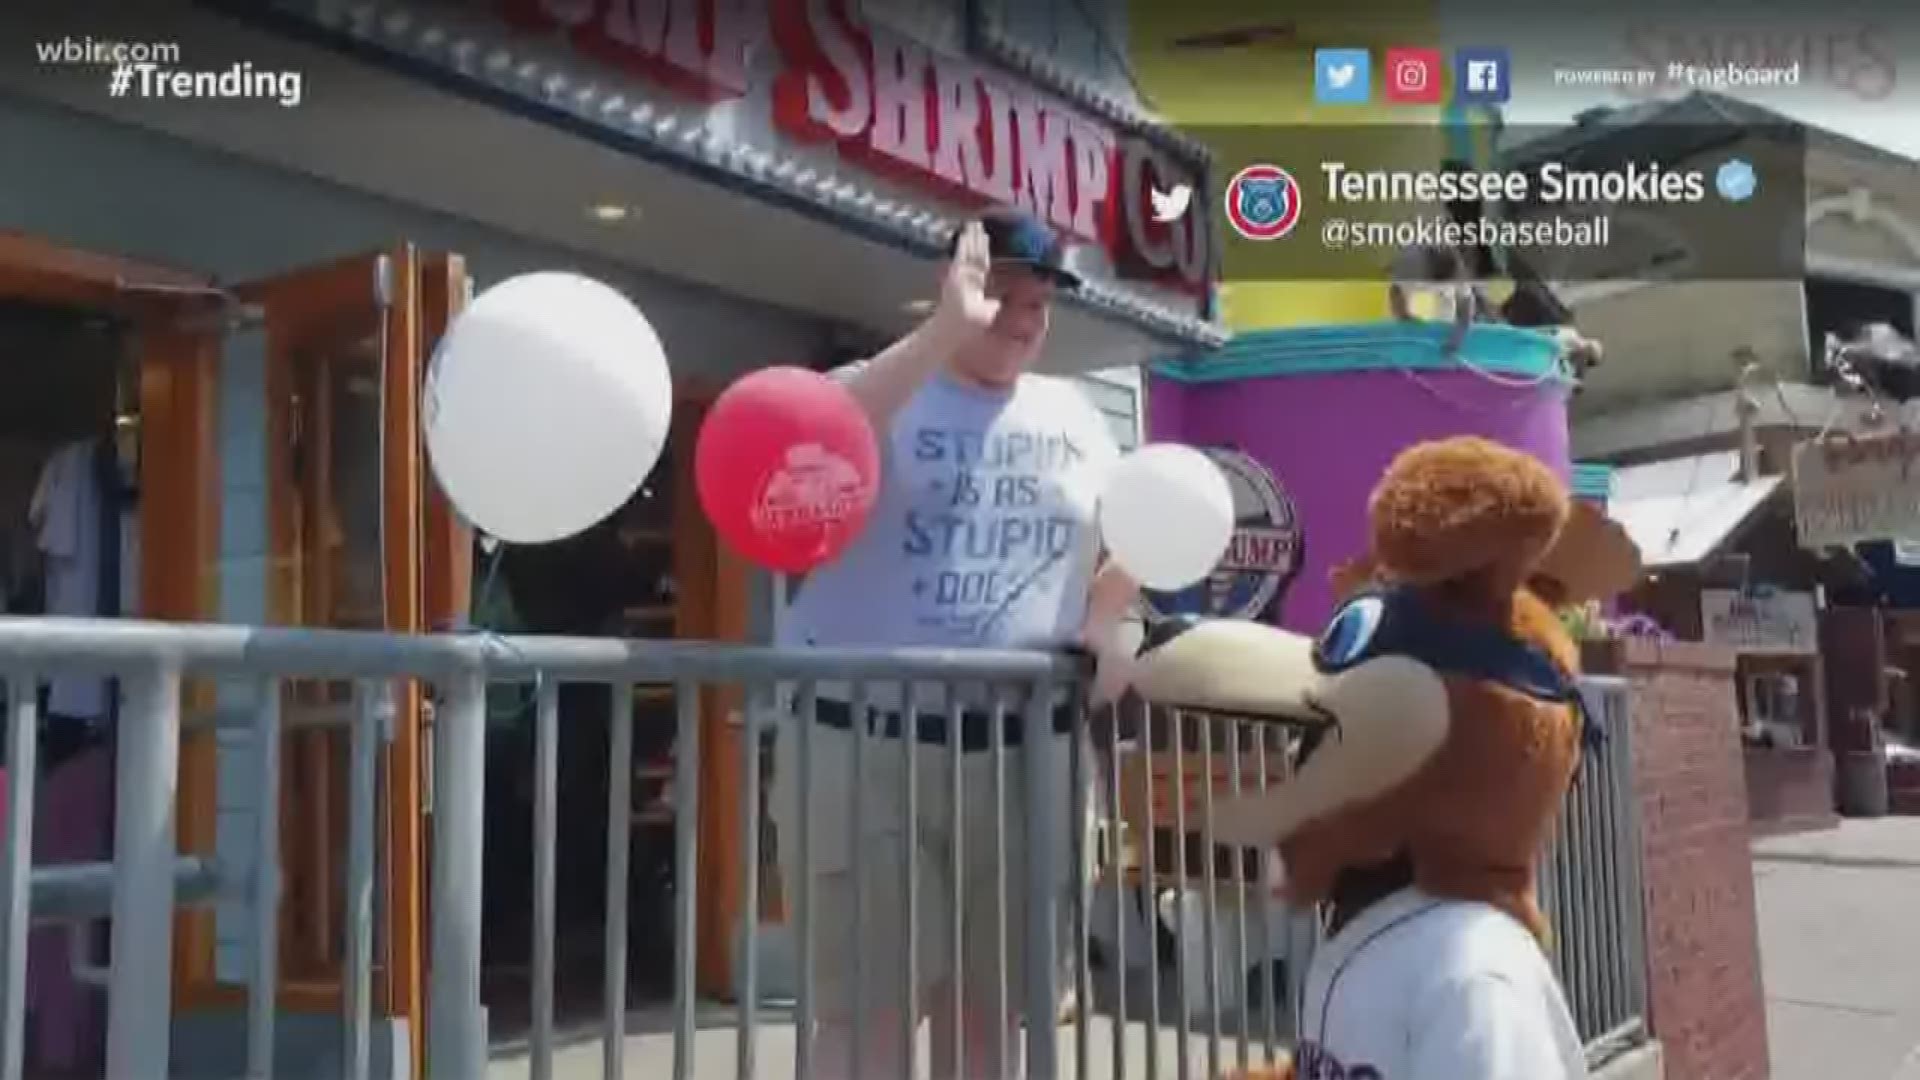 Homer and the Rally Ranger took to the streets of Gatlinburg singing one of the hottest song of the year.